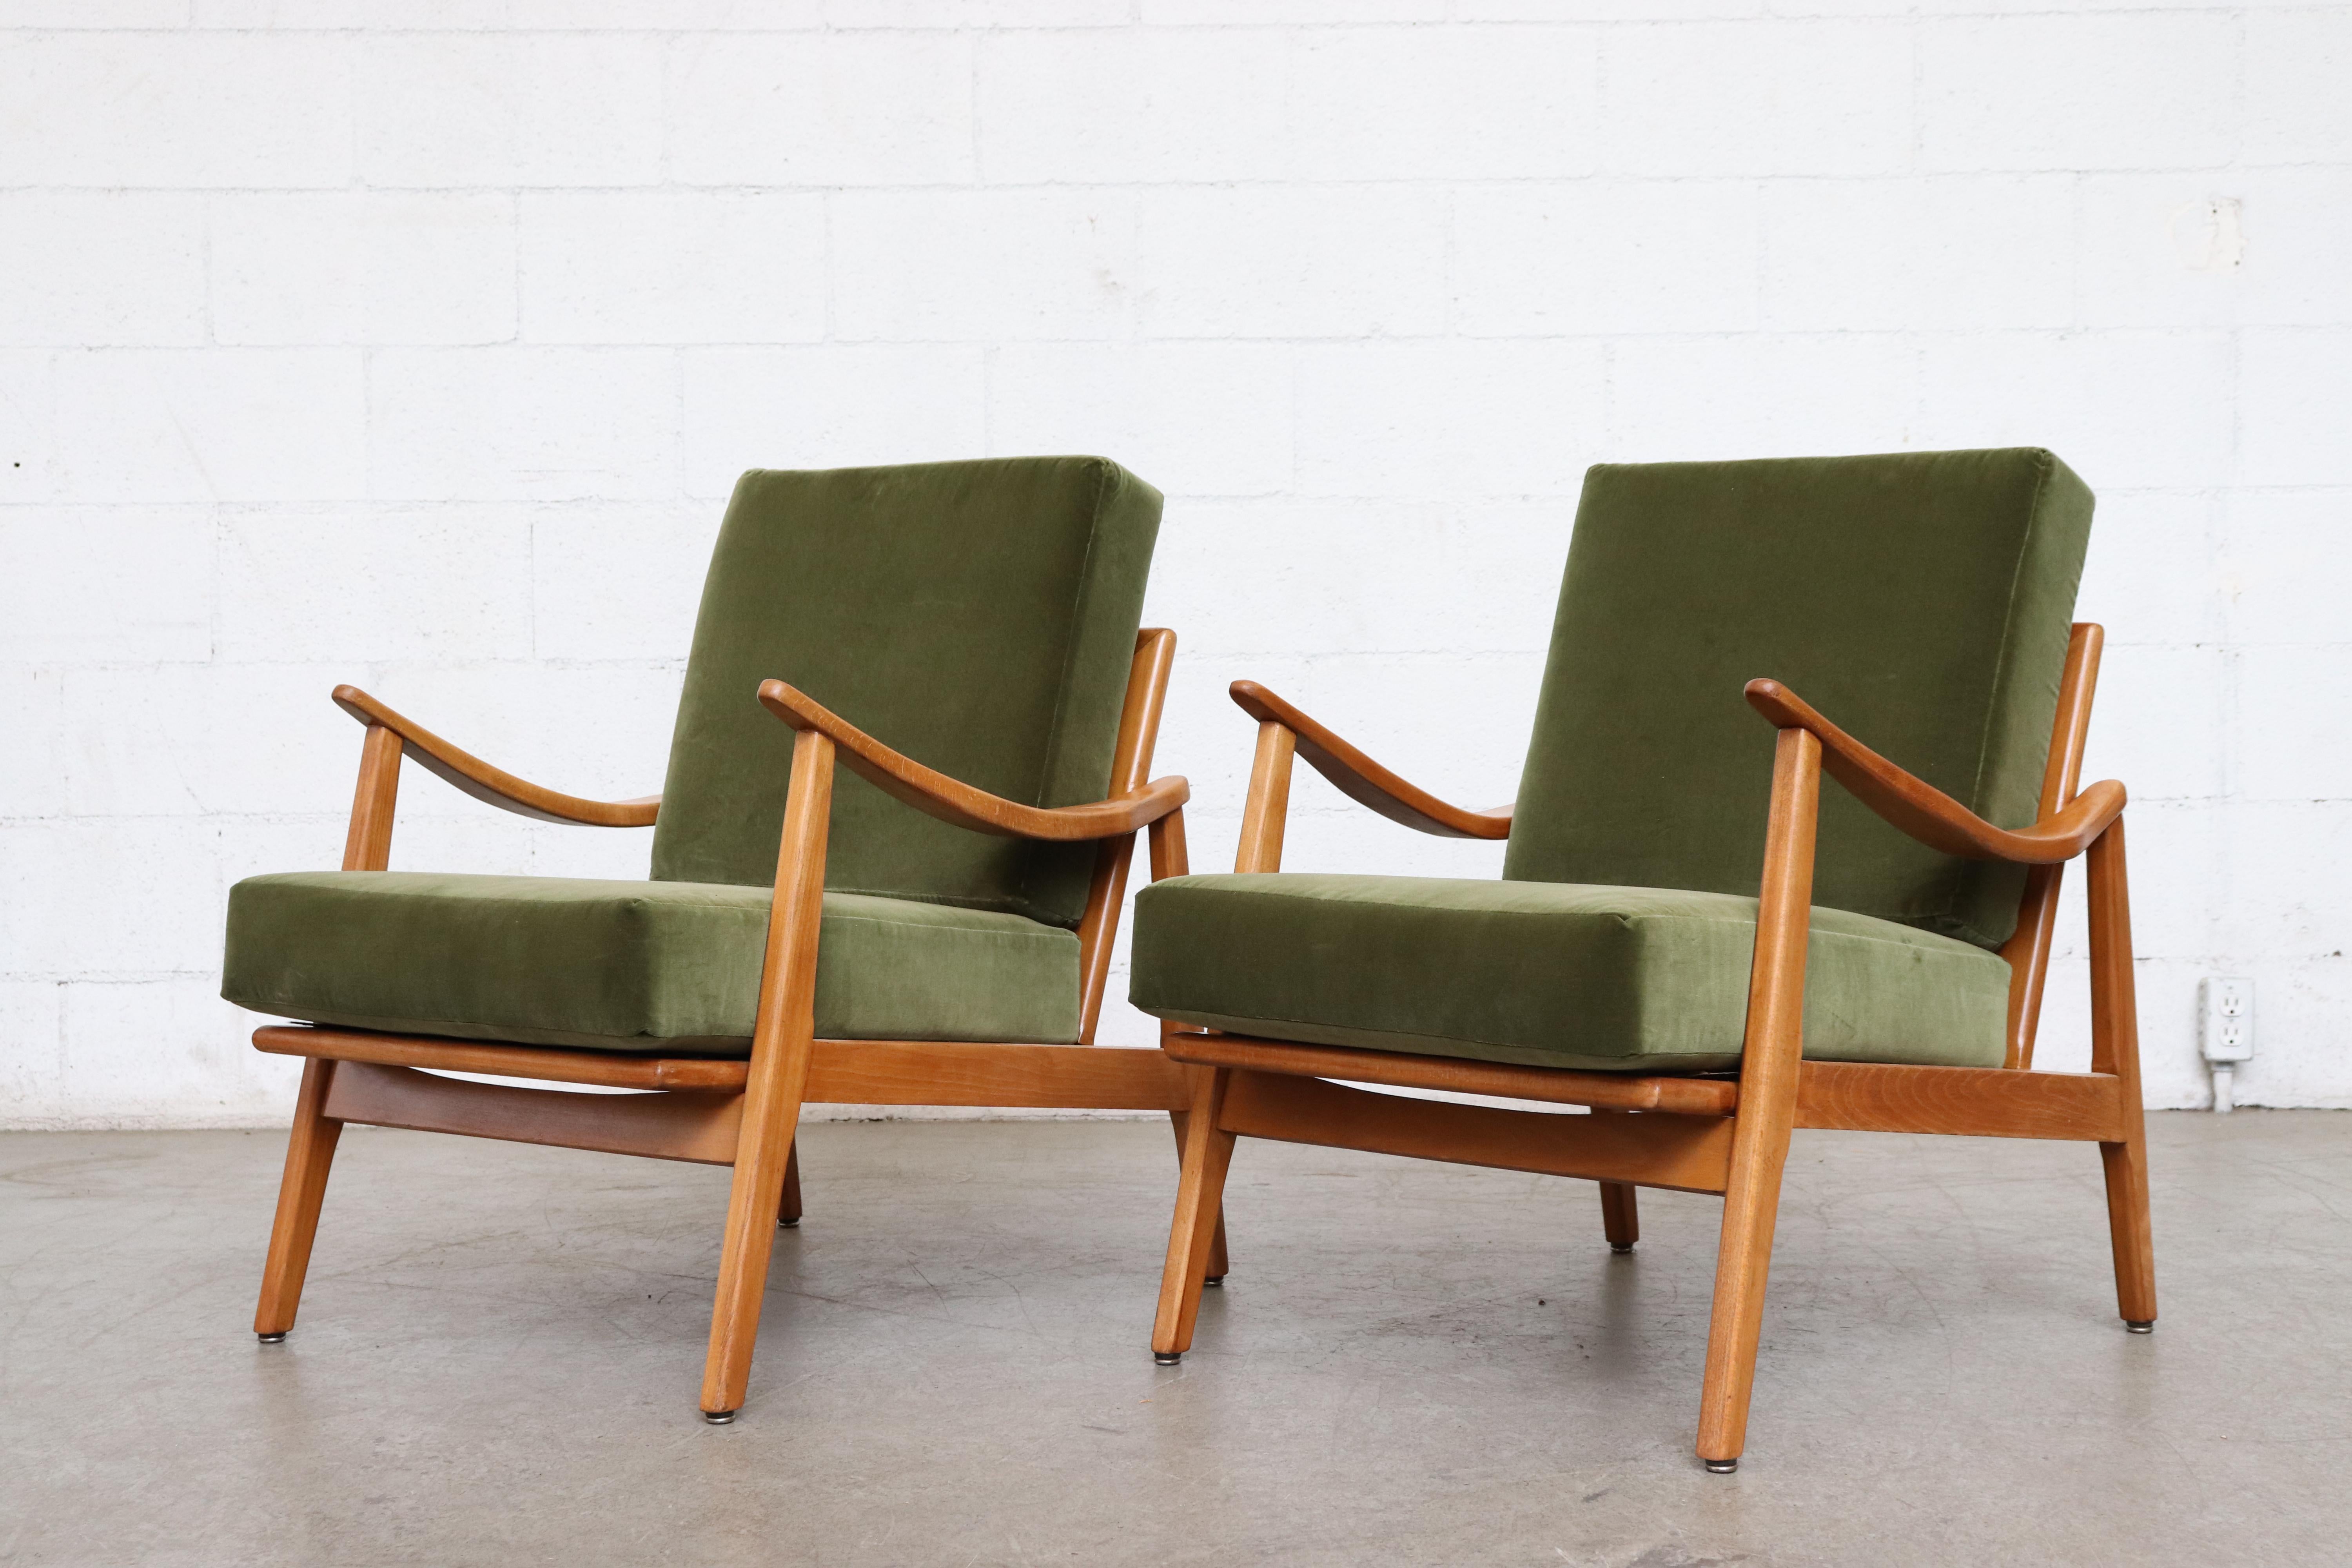 Pair of Danish midcentury lounge chairs. Newly upholstered in green velvet with lightly refinished wood frames. Naturally bent armrests and spindle backs. Set price. Other similar sets available, listed separately.